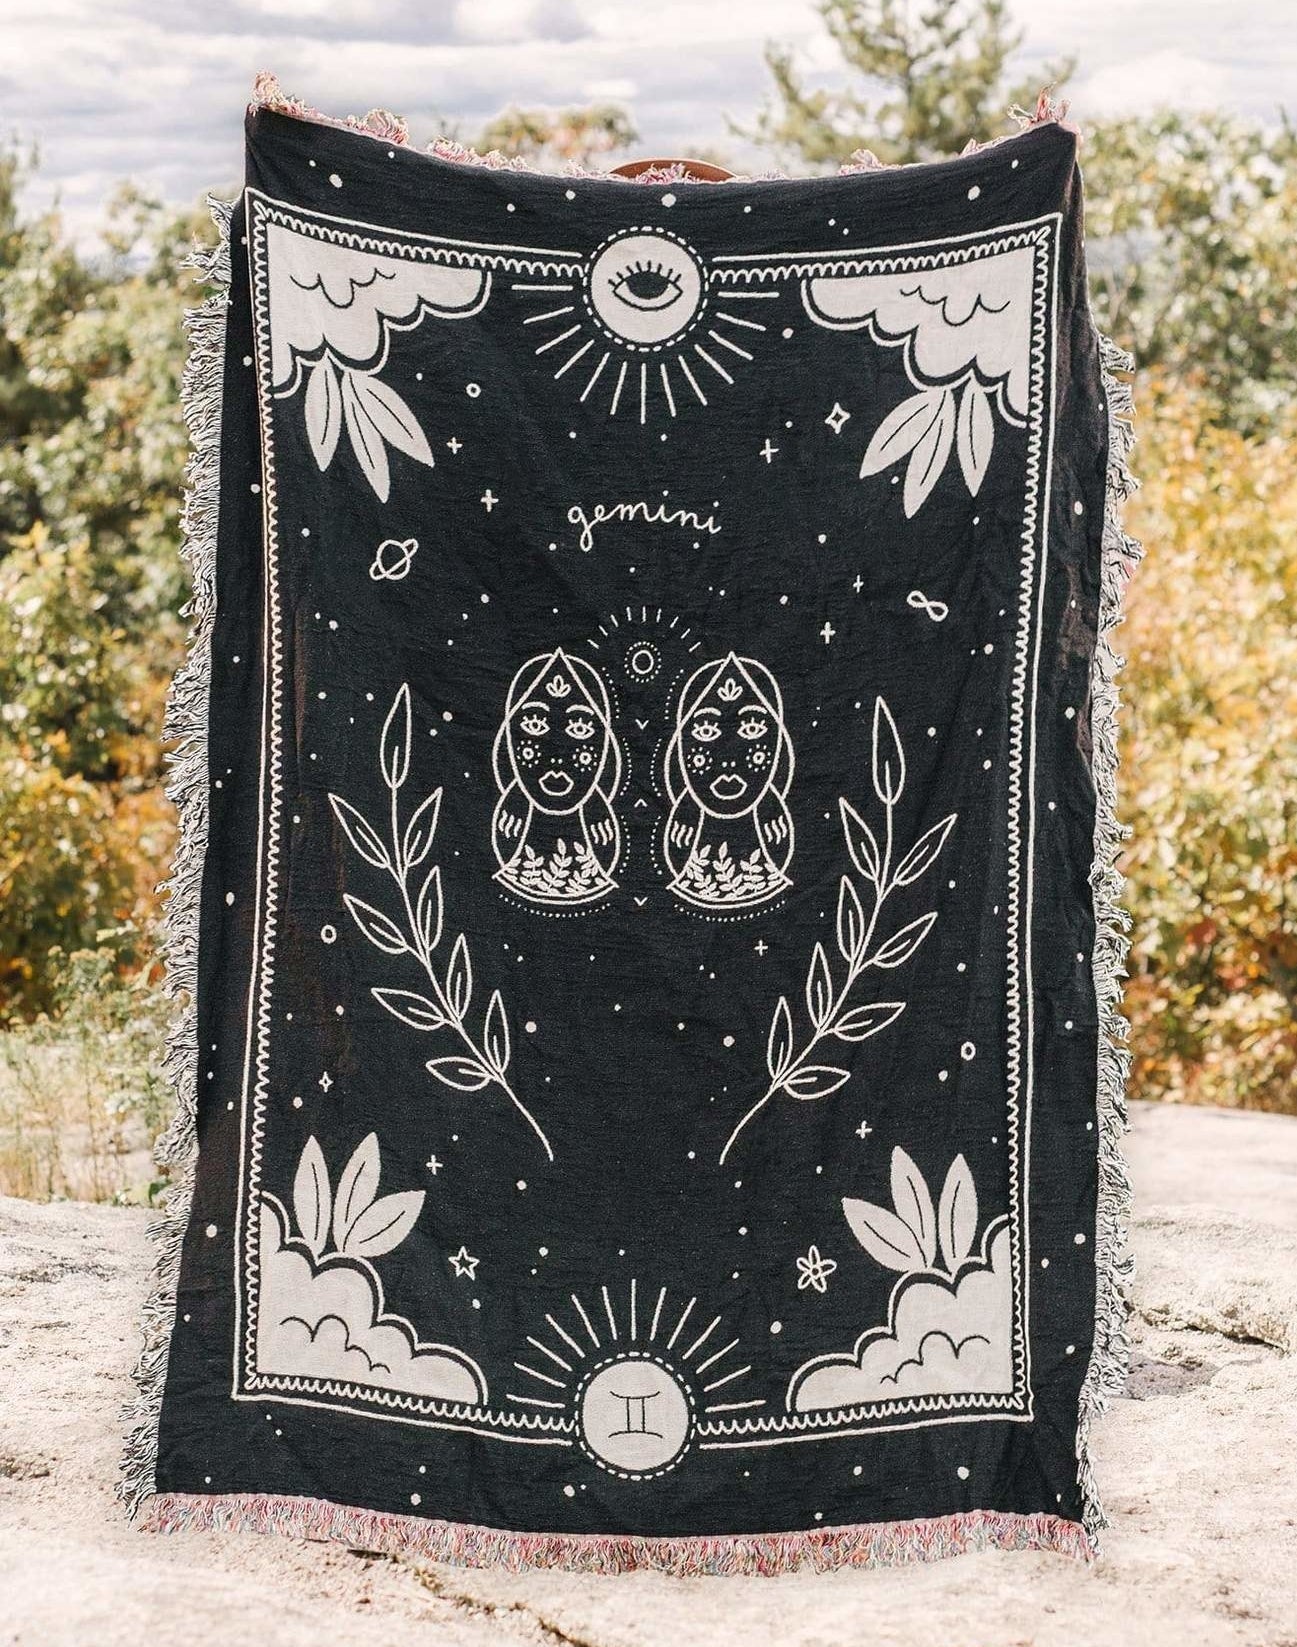 A black throw blanket with fringe throughout the edges and a celestial zodiac design on the front for Gemini